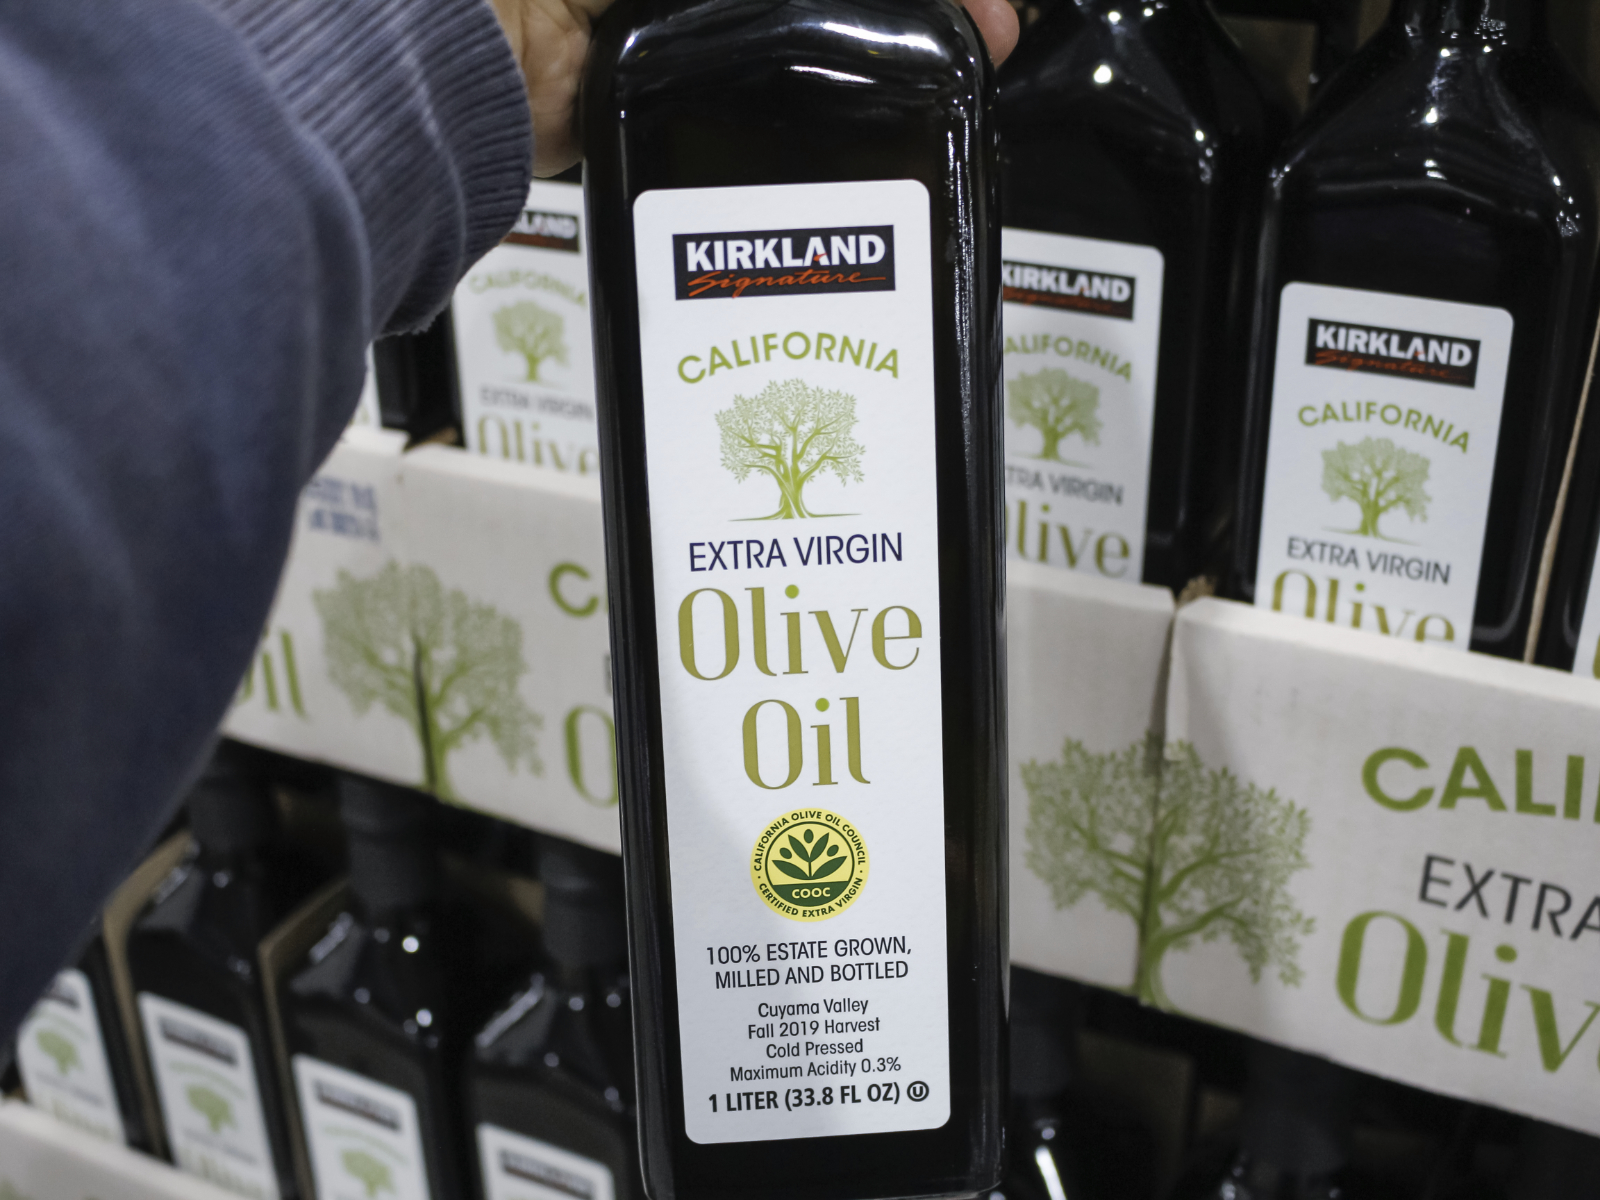 costco shopper holding a bottle of olive oil